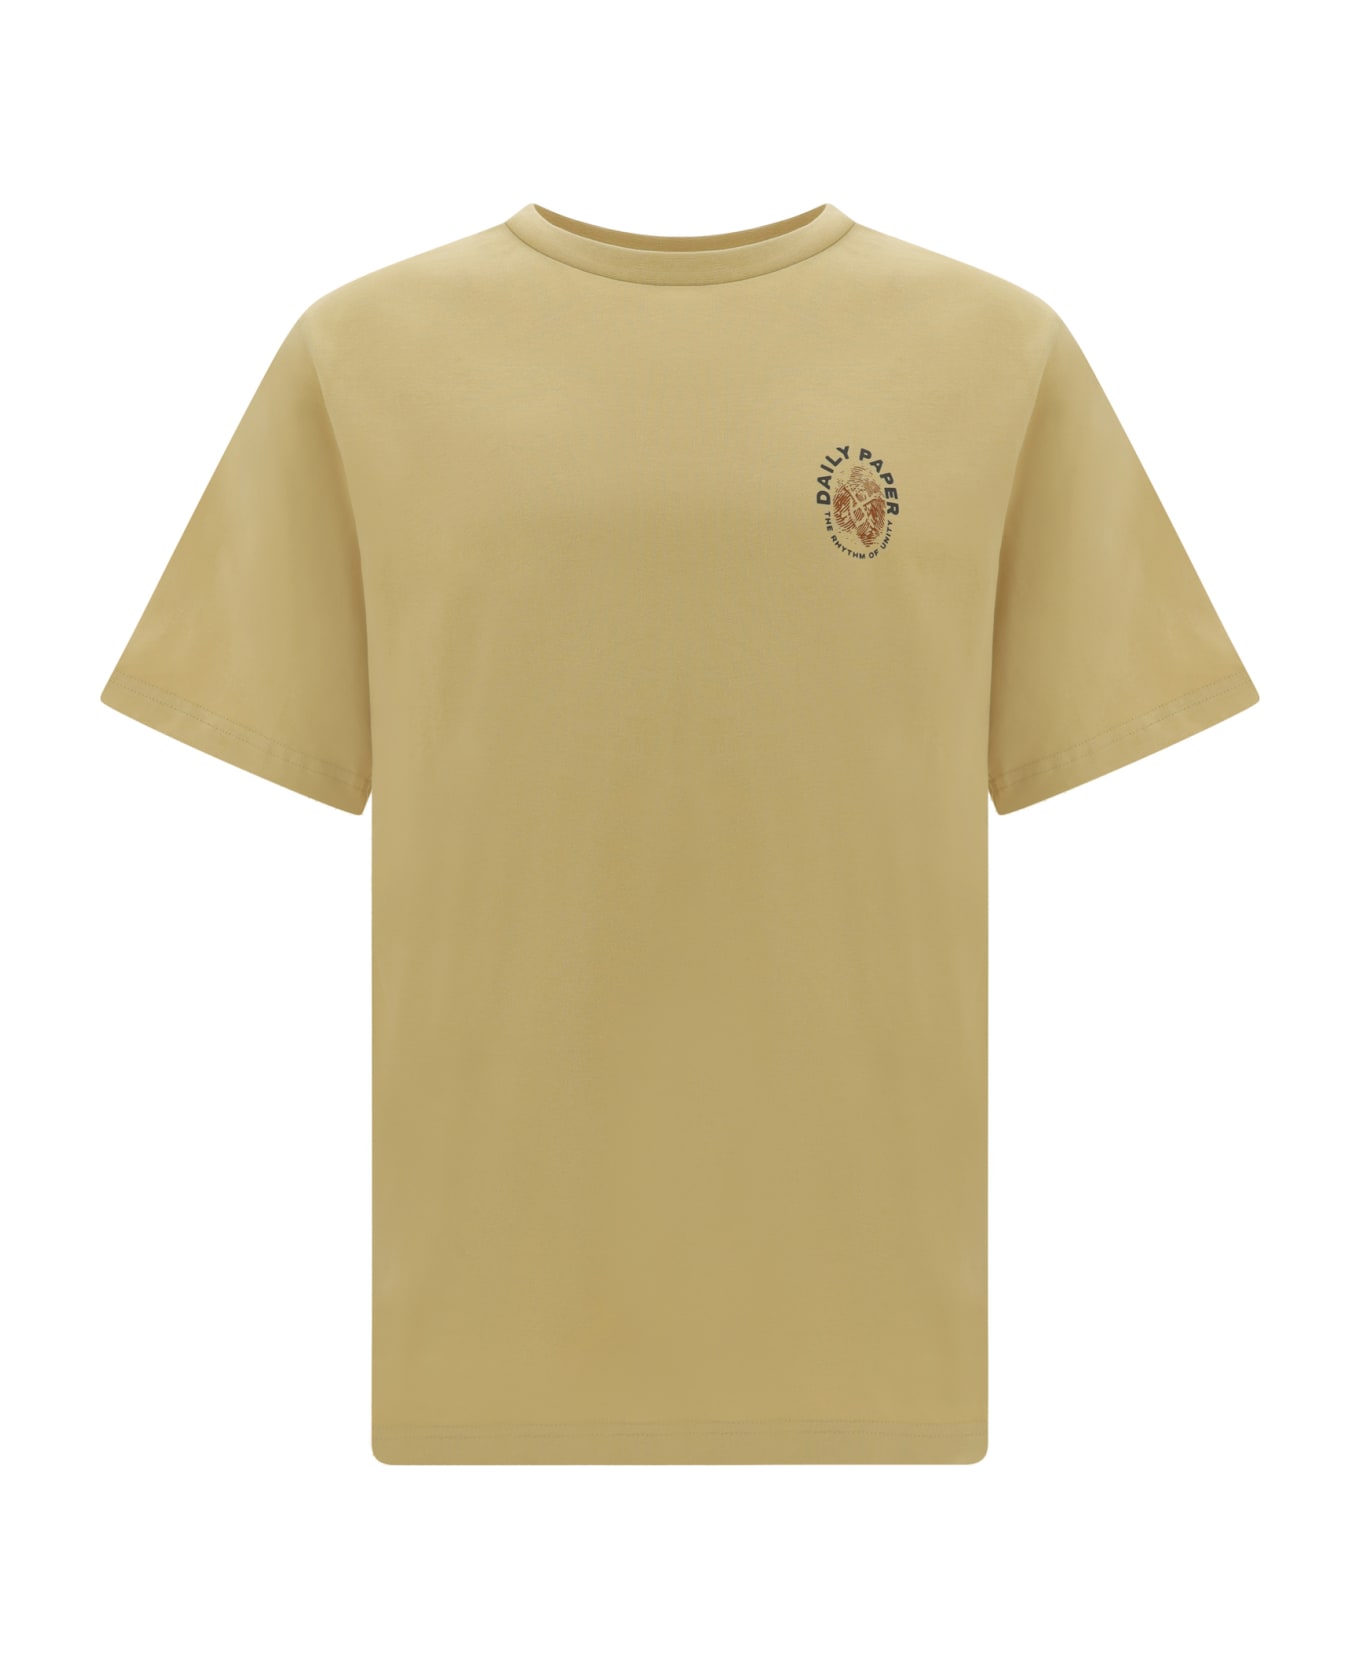 Daily Paper Identity T-shirt - Taos Beige シャツ